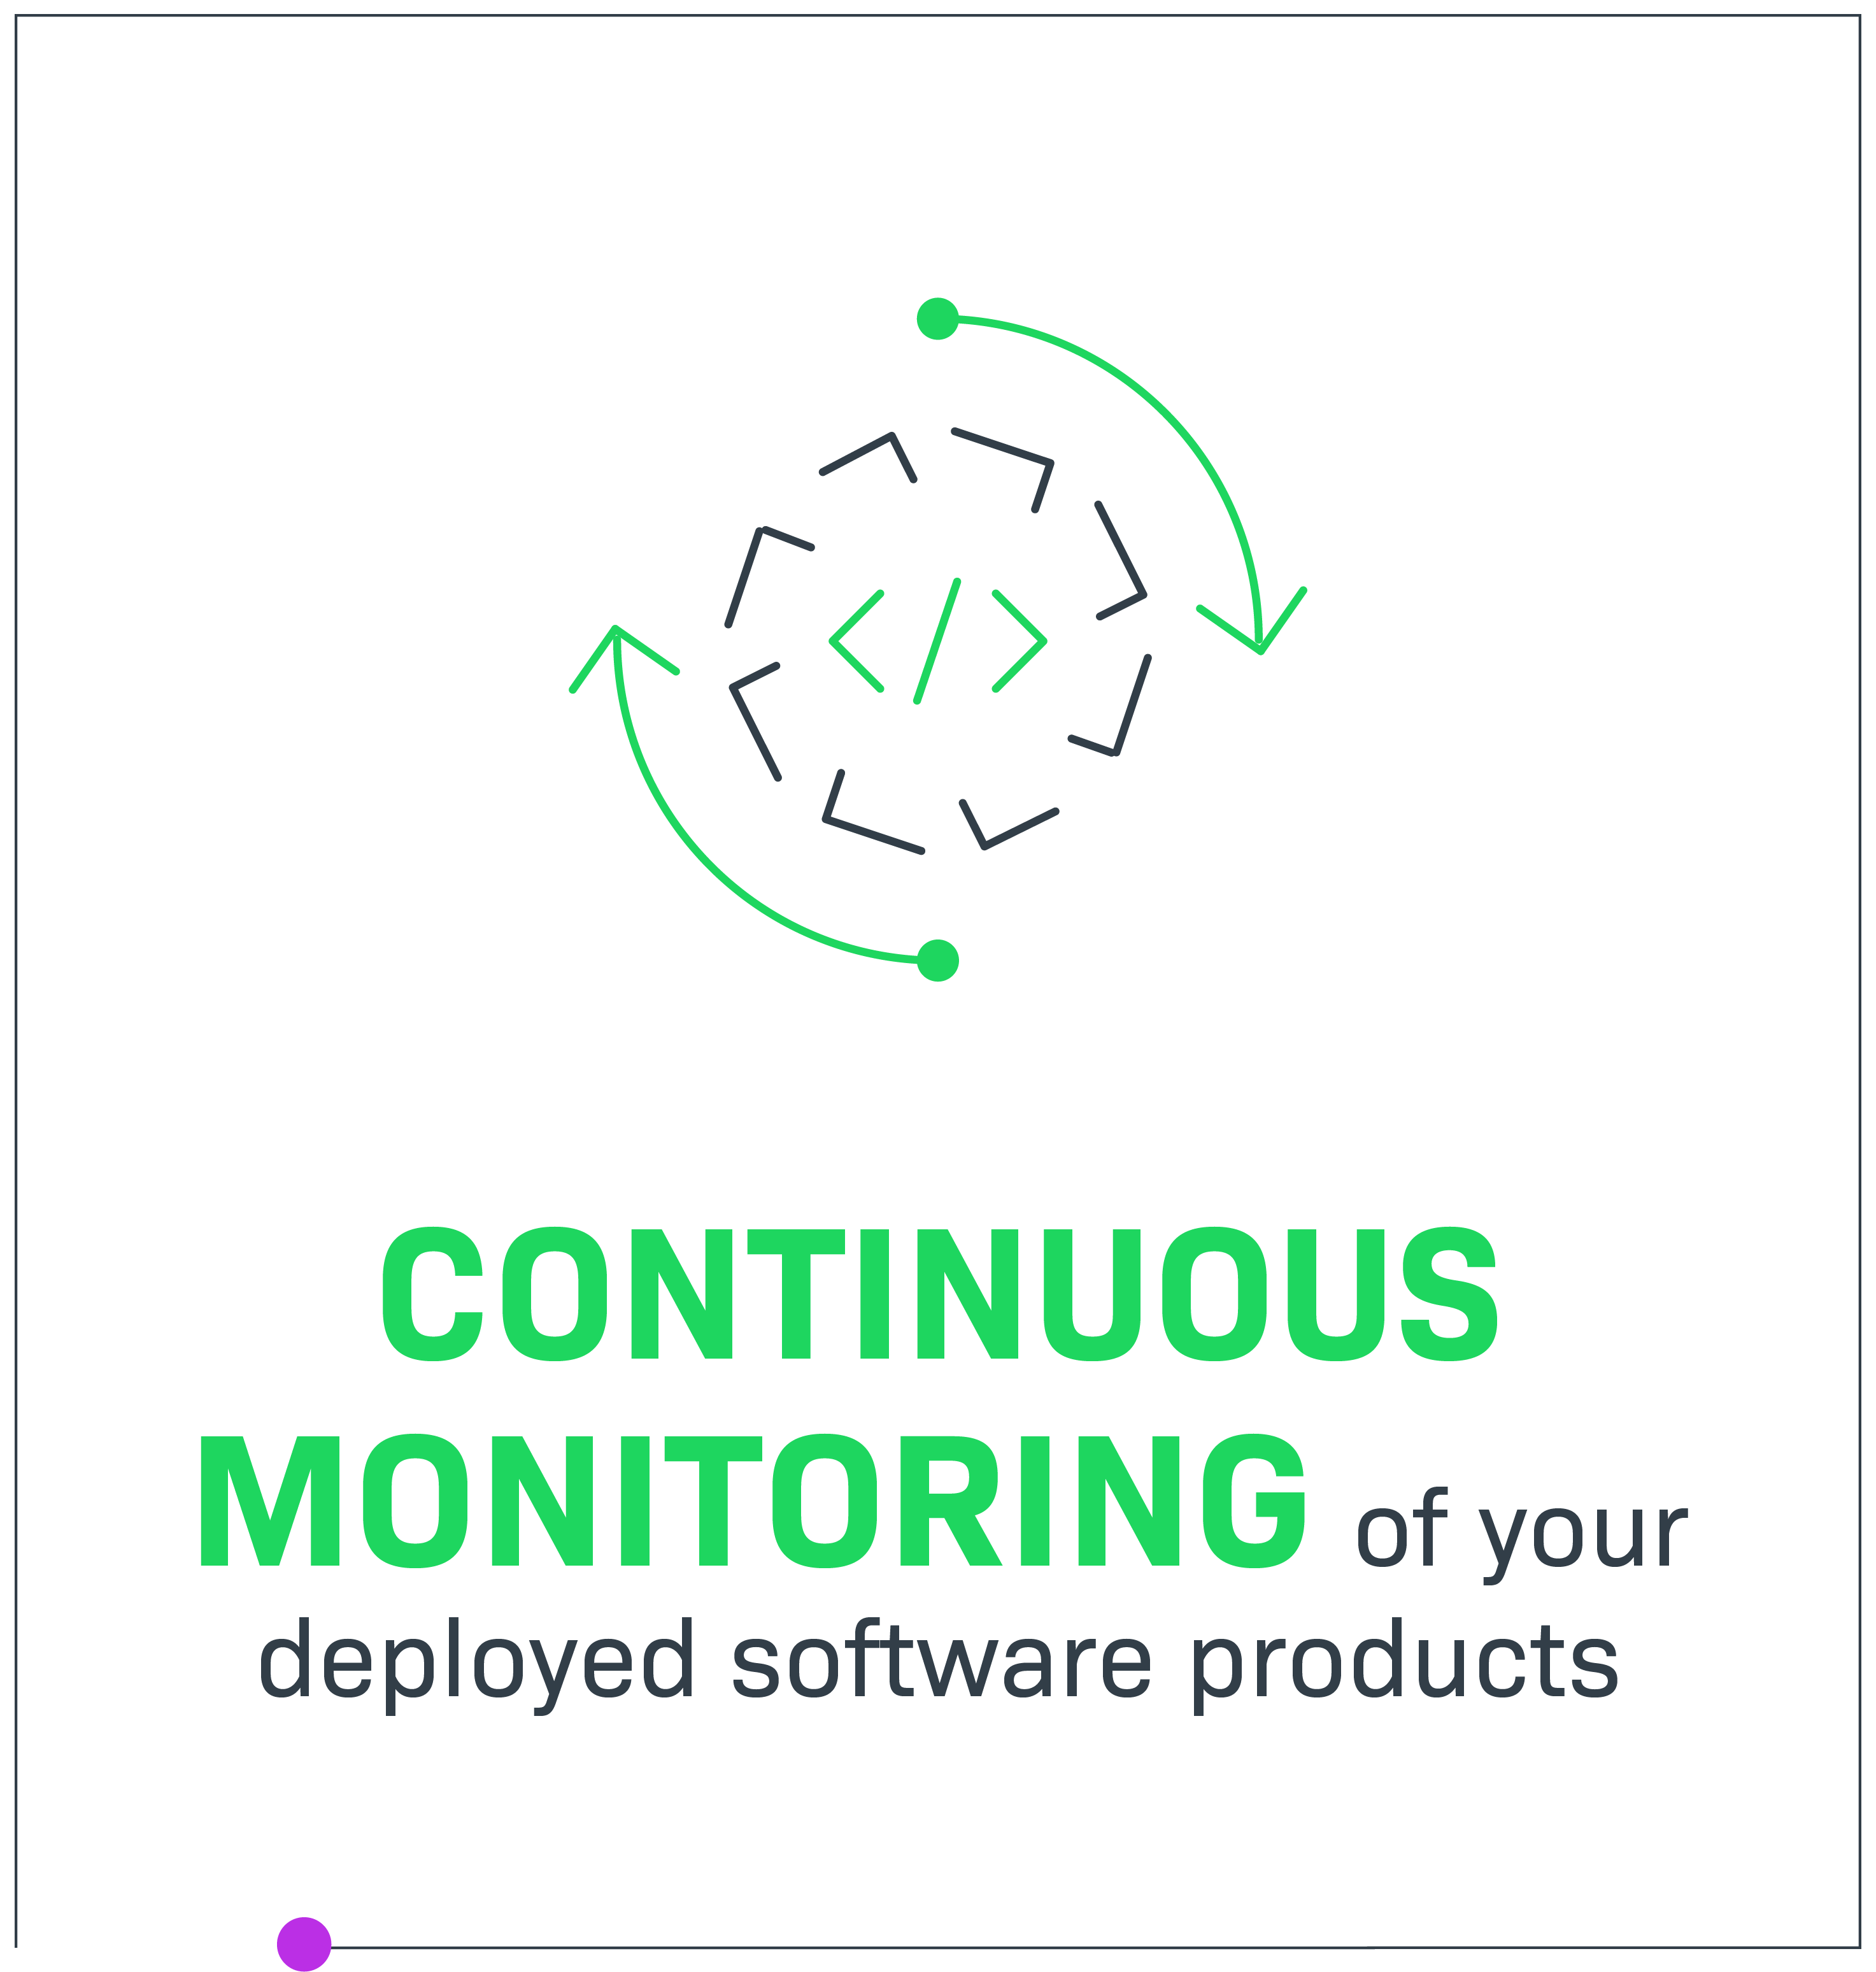 Continuous monitoring of your deployed software products